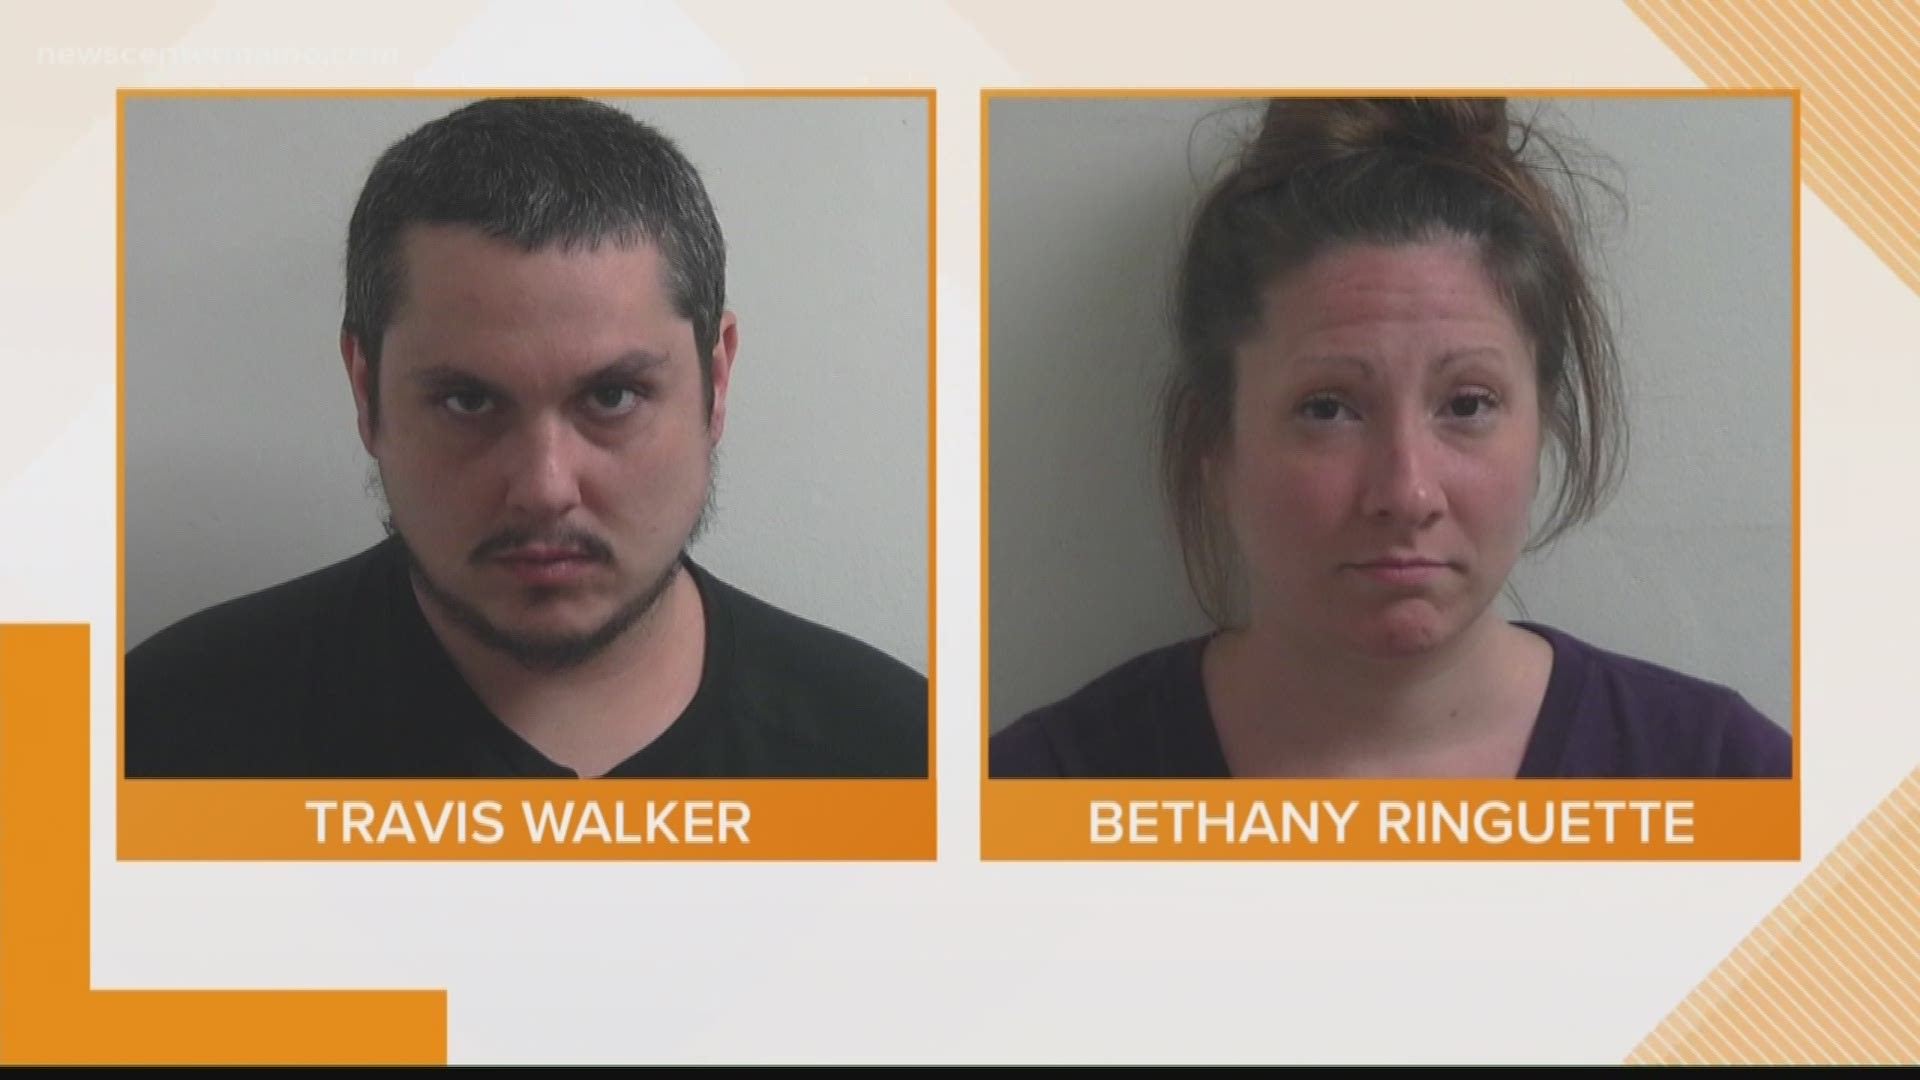 Rumford police arrested Travis Walker and Bethany Ringuette for sex crimes.